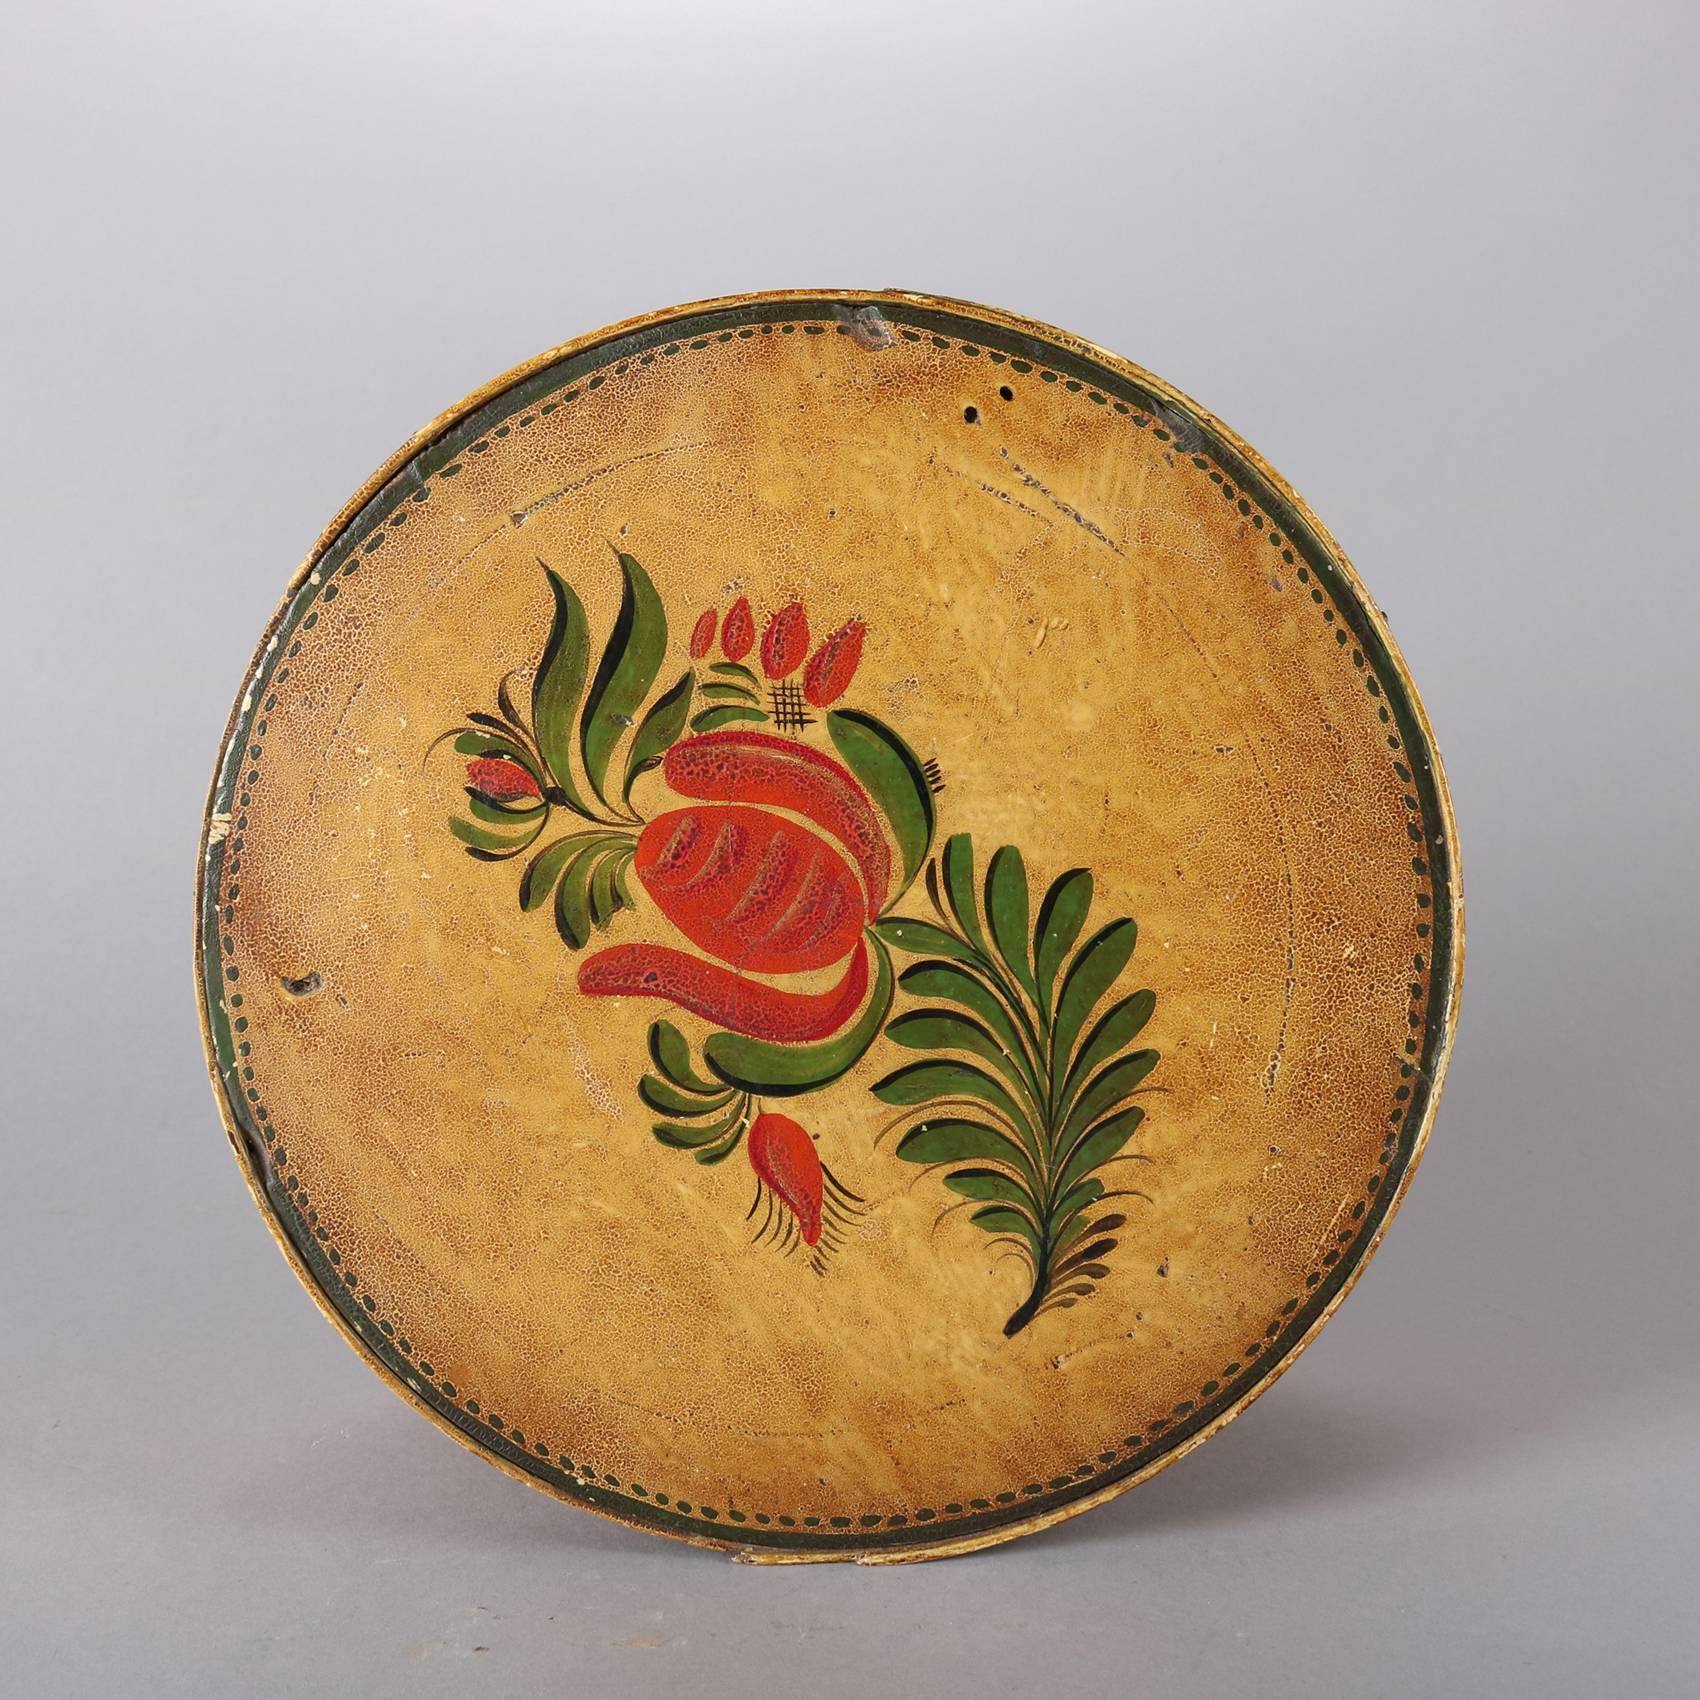 Hand-Painted Antique Folk Art Grain & Paint Decorated Shaker Pantry Cheese Box, 19th Century